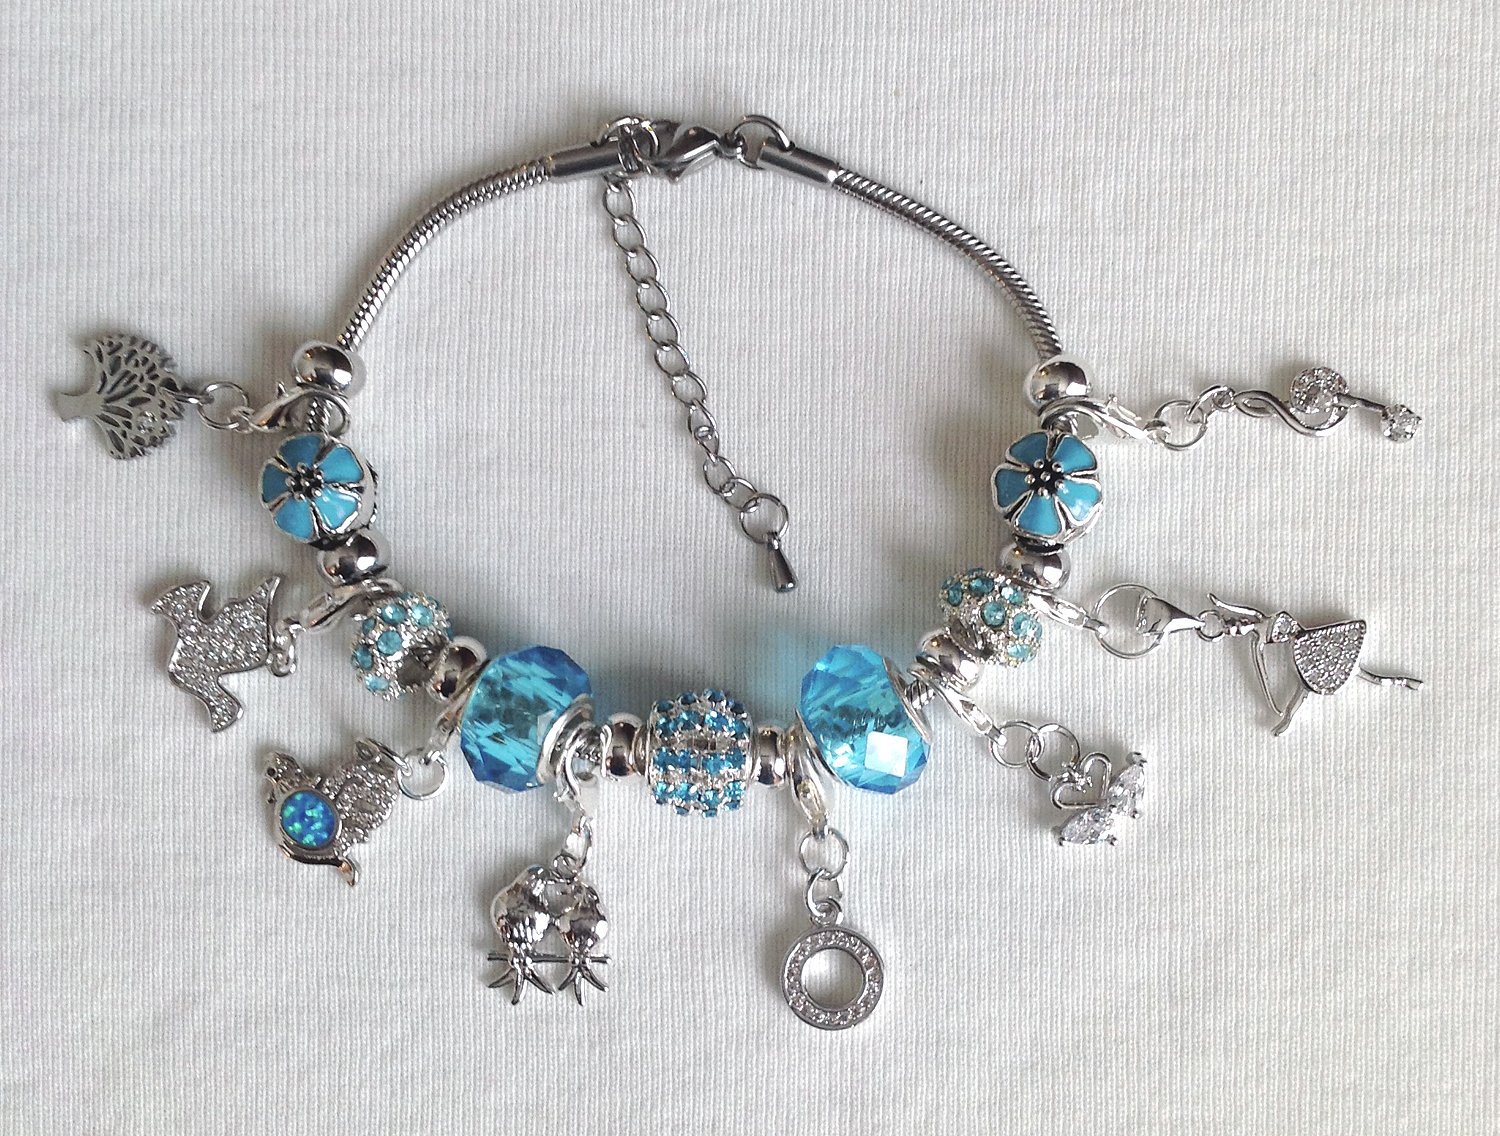 Days of Christmas Cubic Zirconia European Style Charm Bracelet in Silver, Turquoise and White